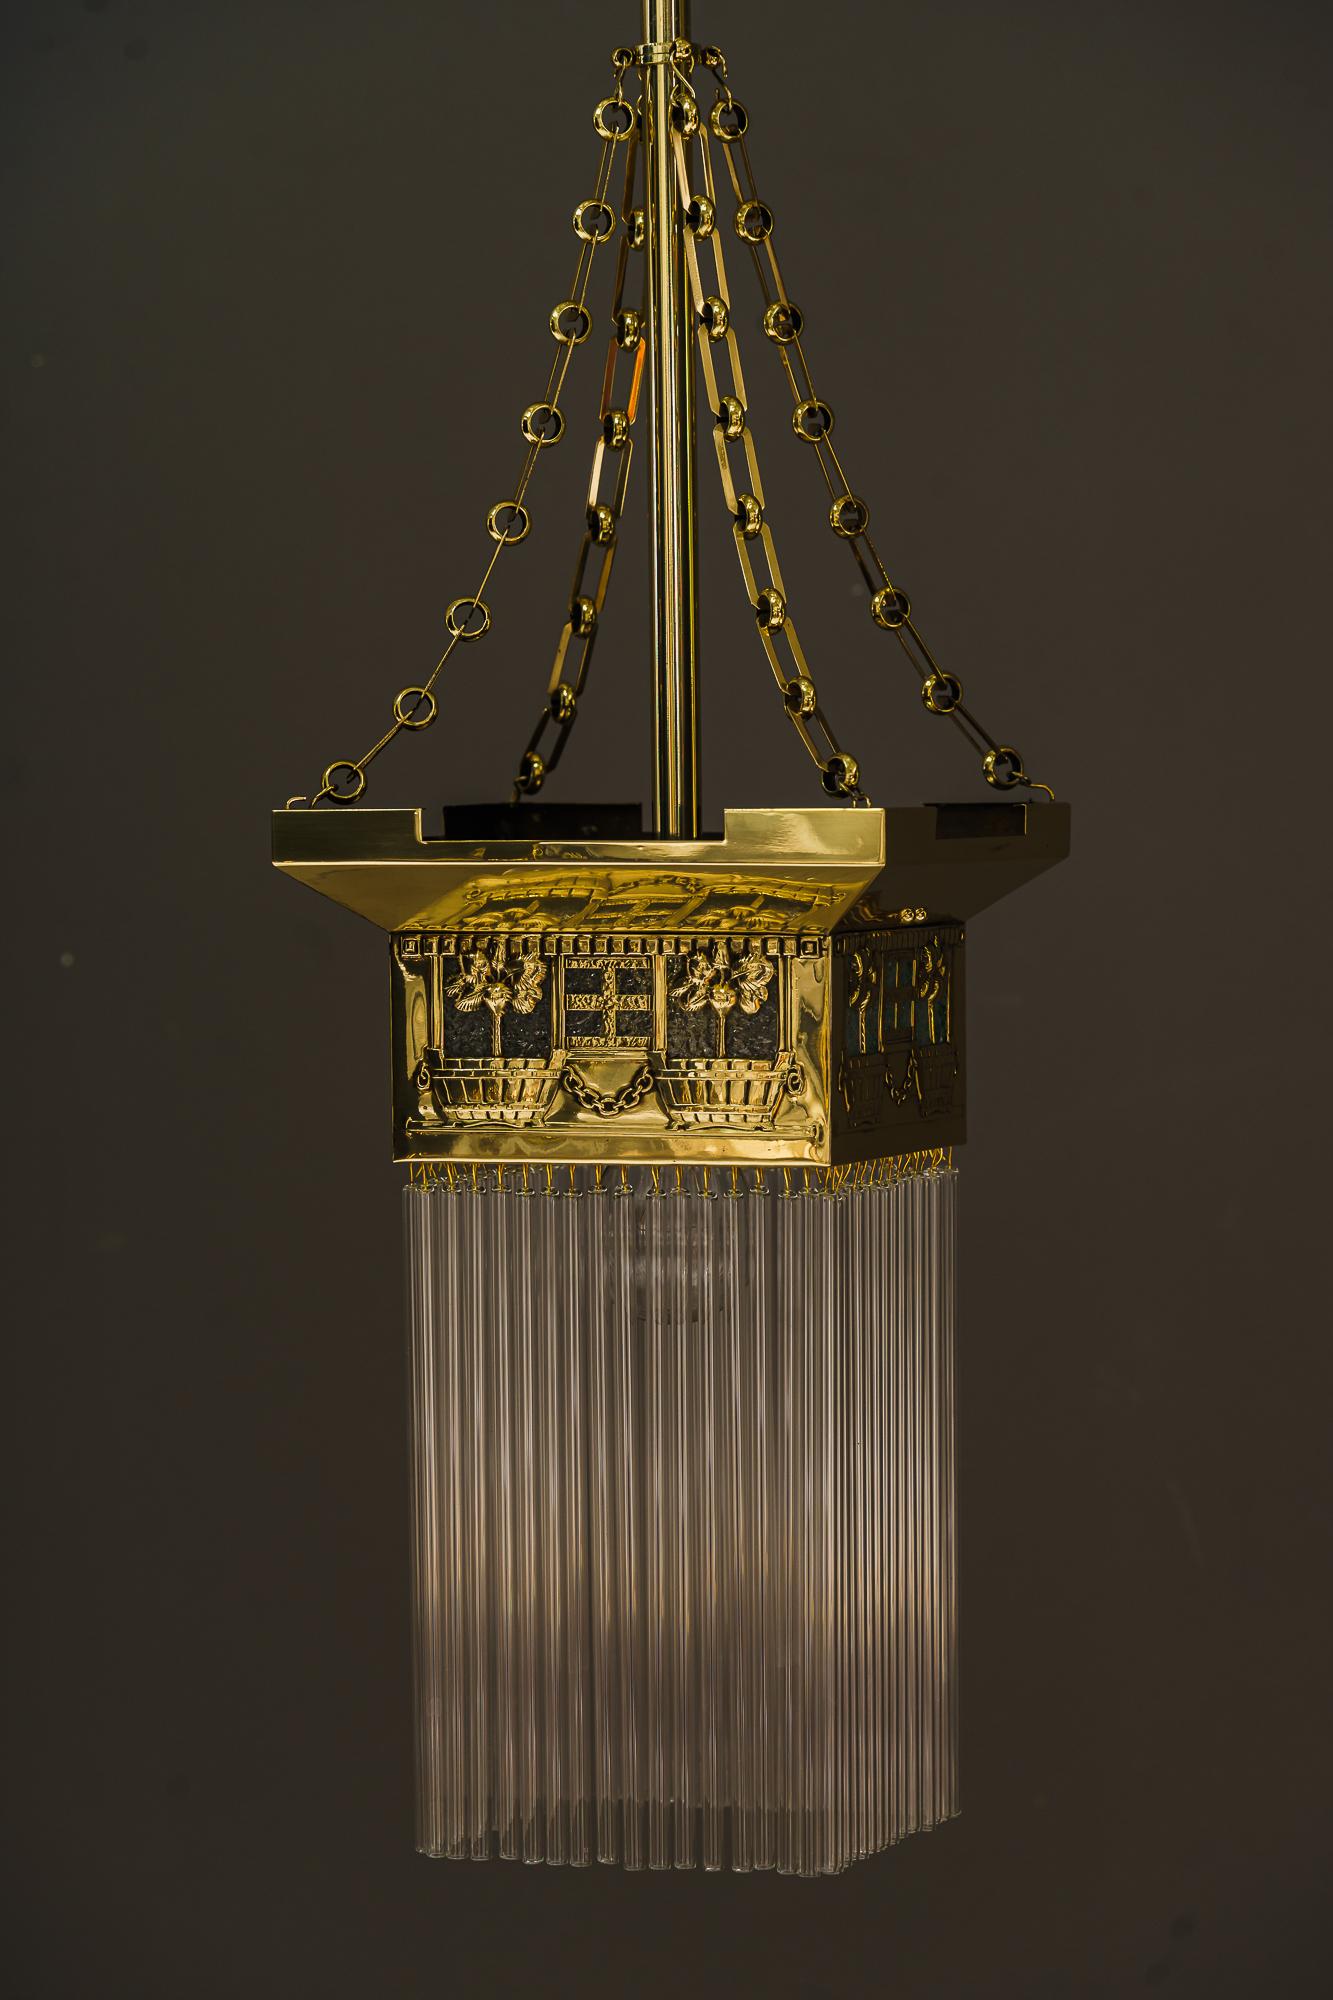 Jugendstil pendant vienna around 1908
Brass polished and stove enameled
Original glass plates inside
The glass sticks are replaced ( new ).